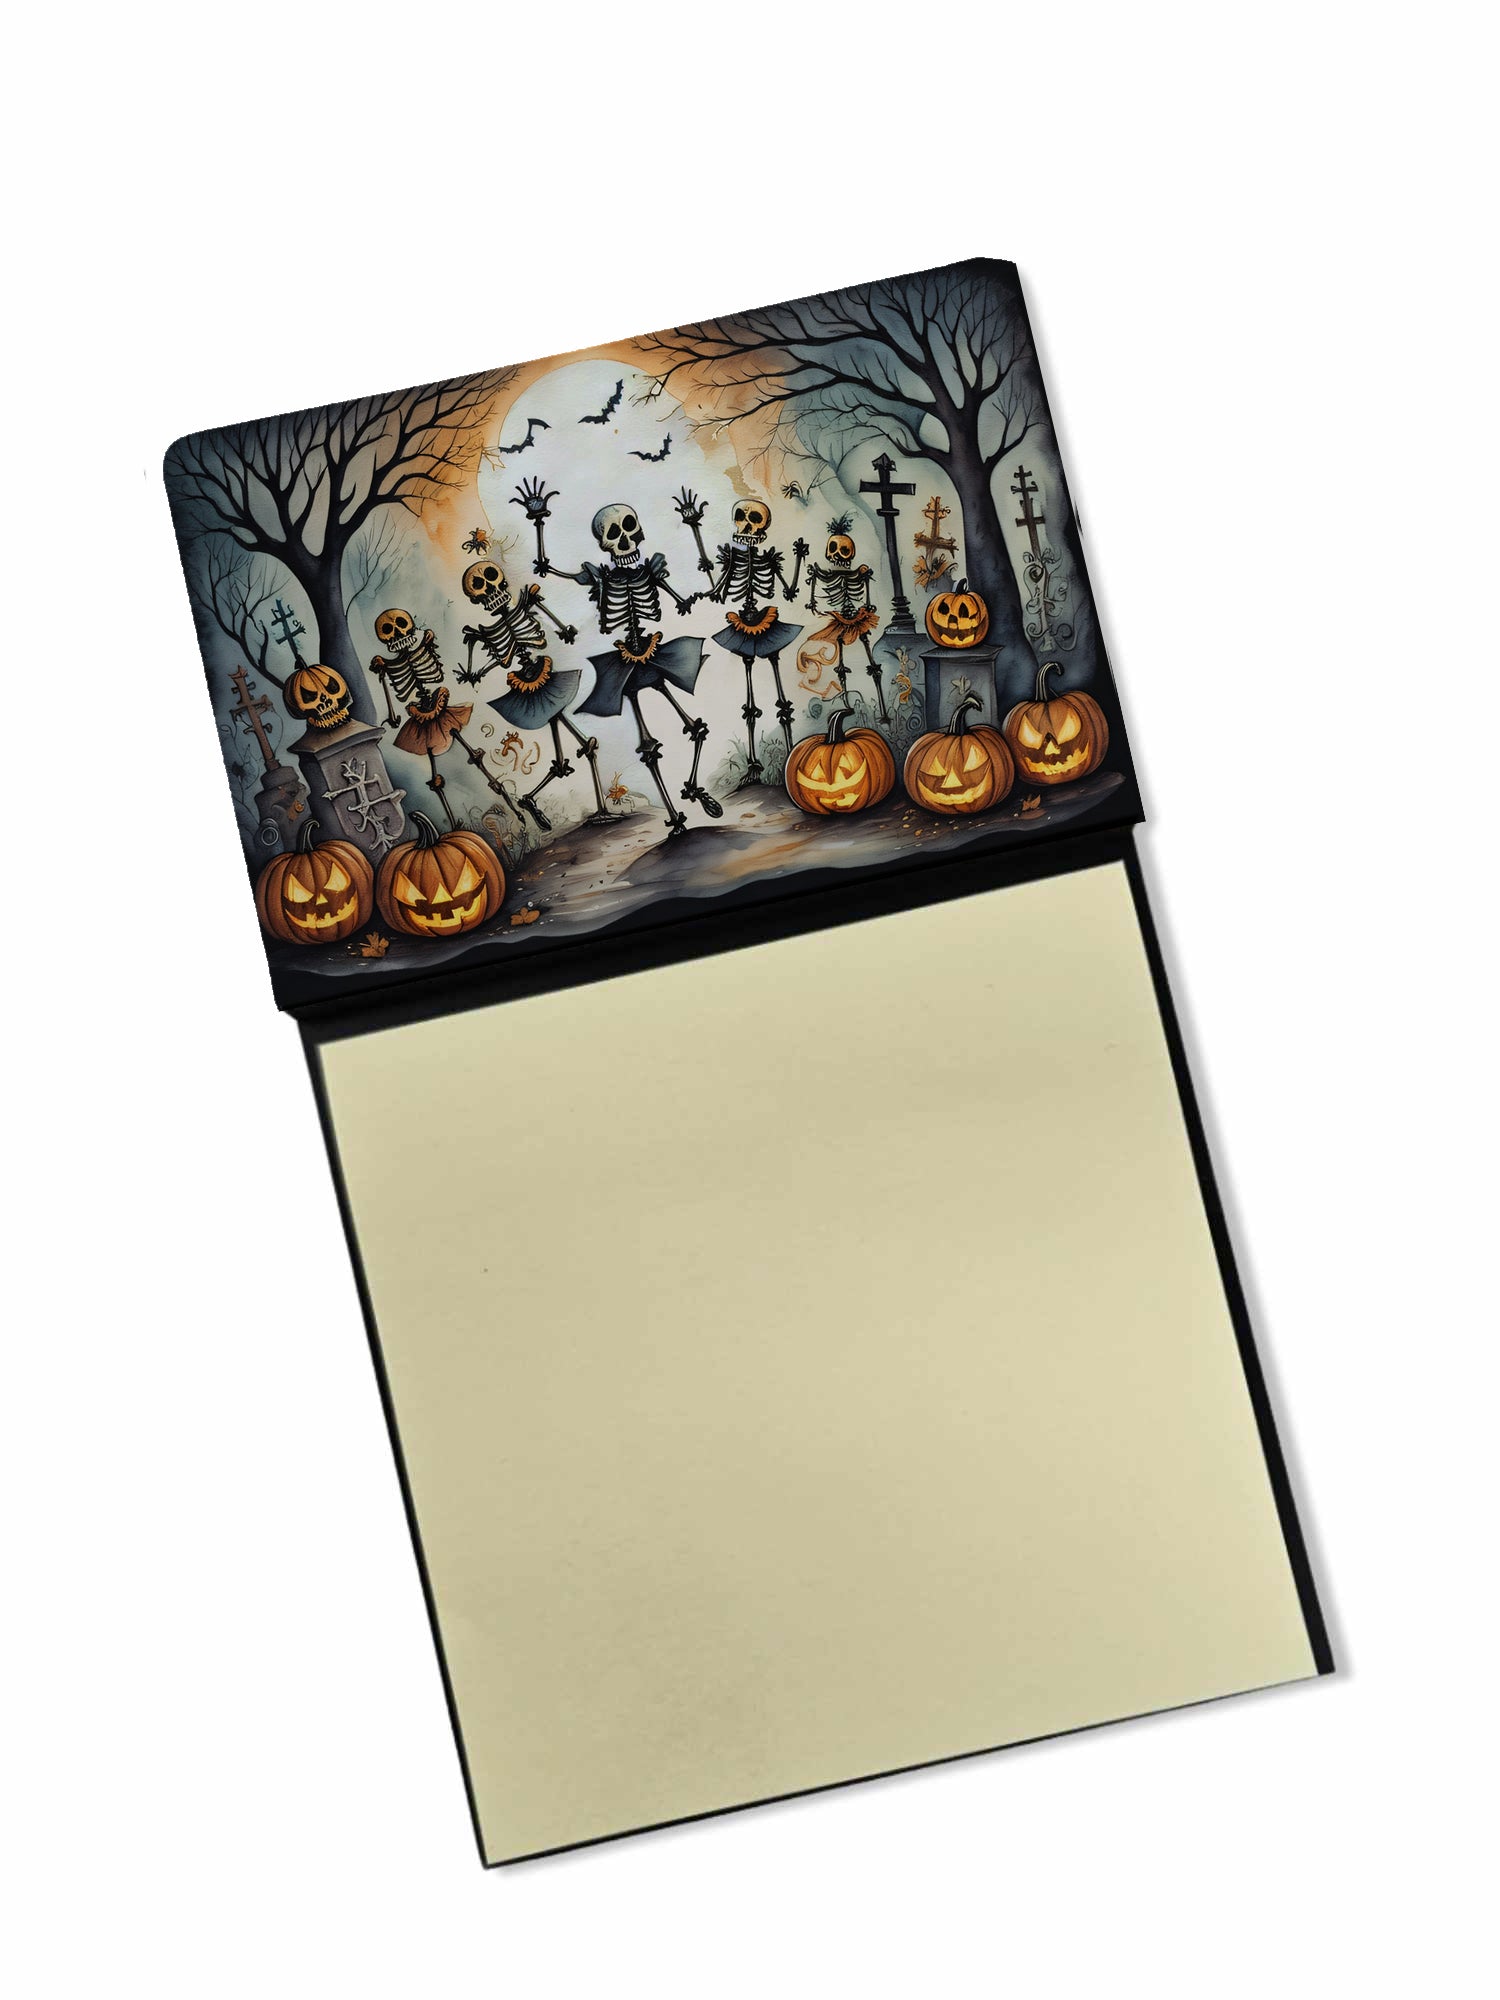 Buy this Dancing Skeletons Spooky Halloween Sticky Note Holder